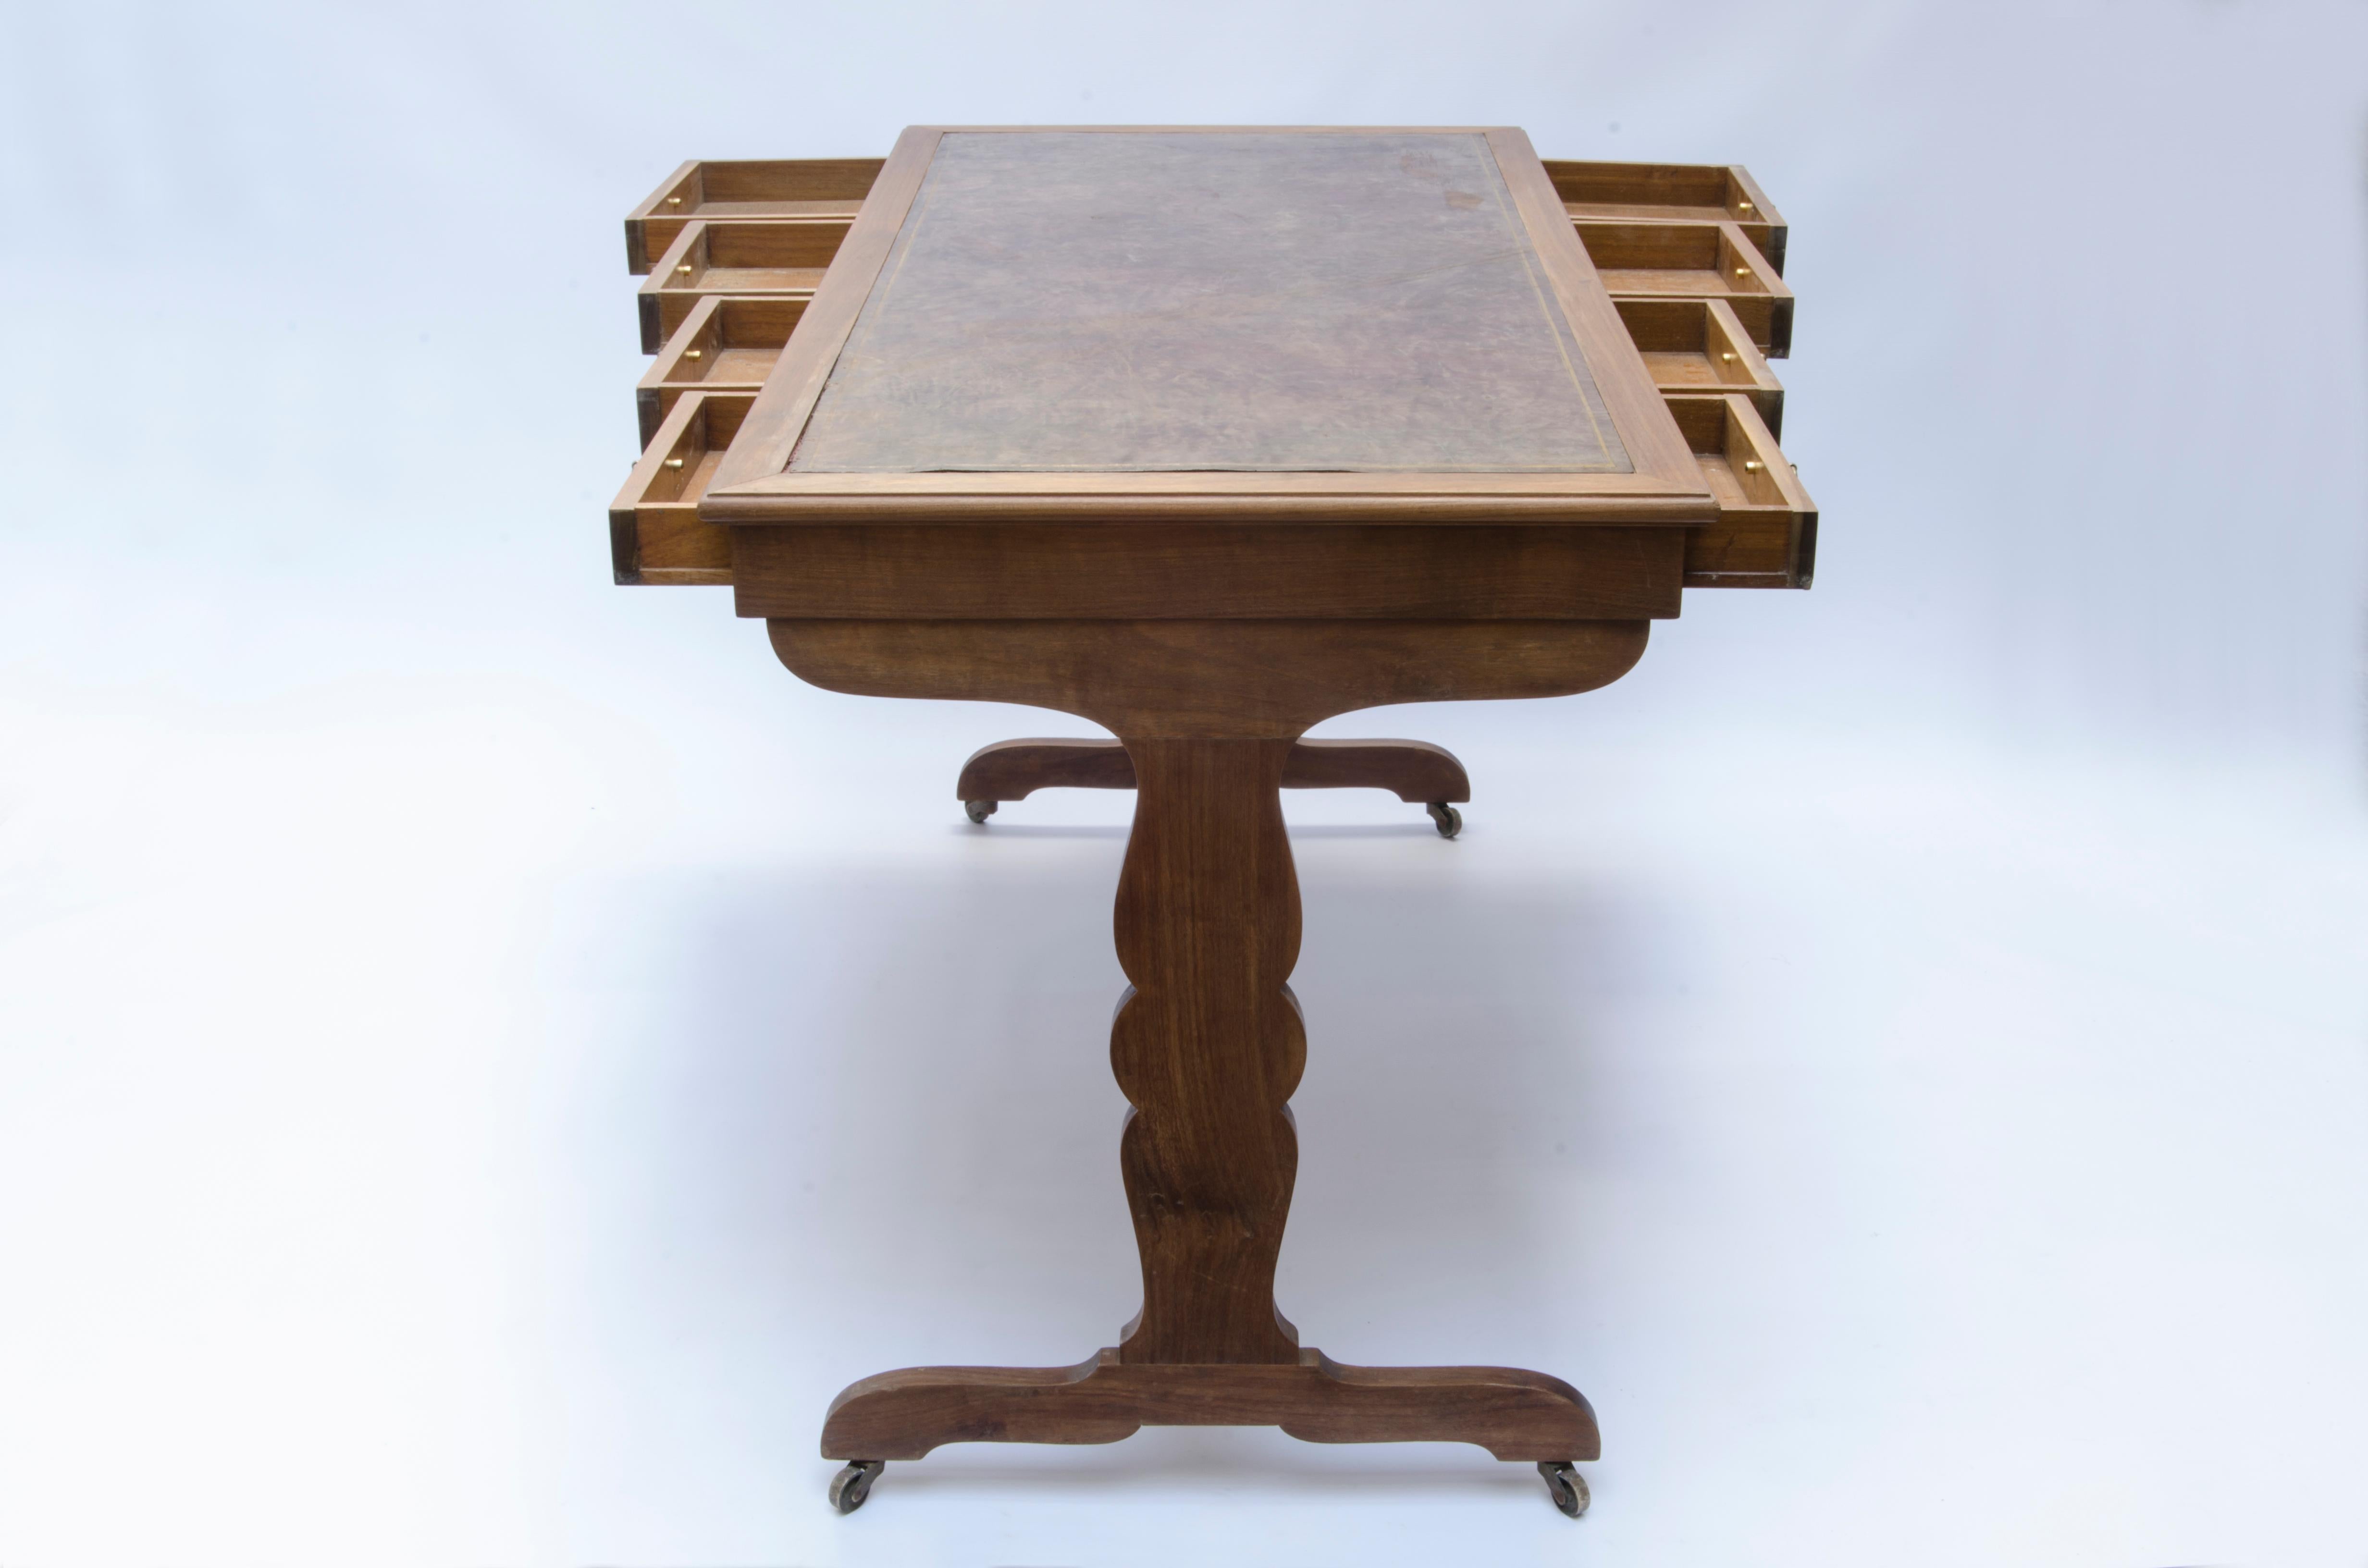 Writing desk made of oak with leather covered top and golden vignette. The table has 8 drawers, 4 on each side.
Design by Jean-Michel Frank(1895-1941).

France, CIRCA 1930.